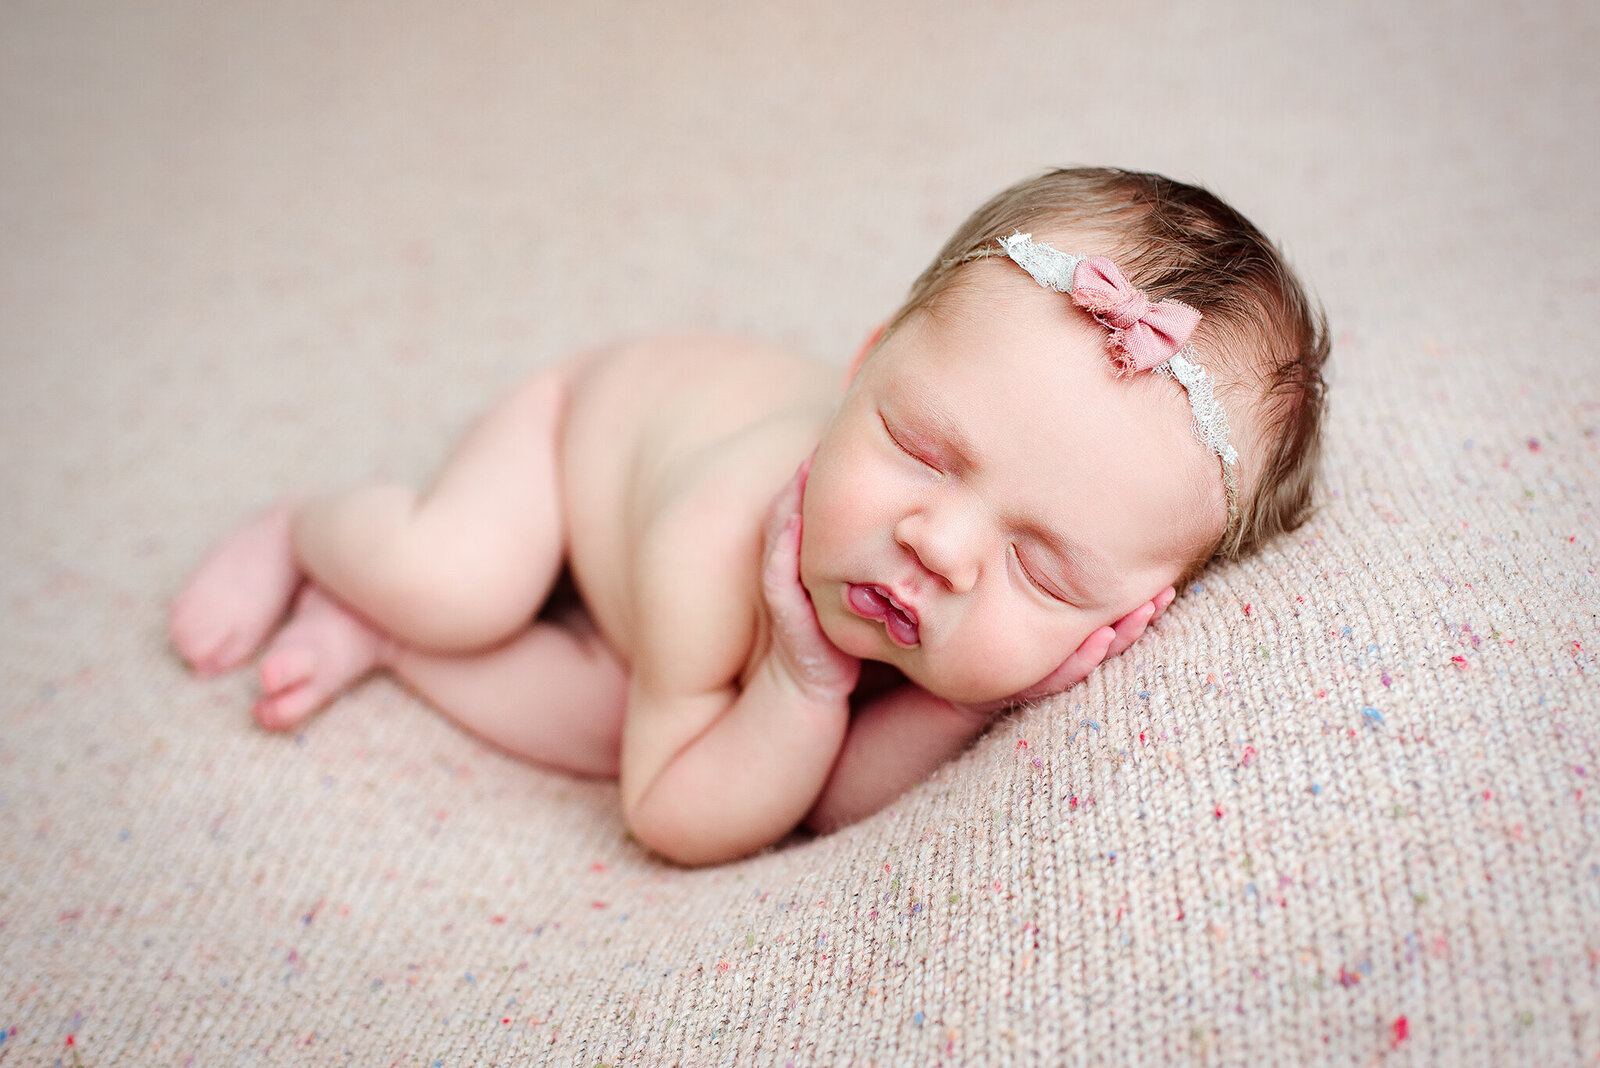 Baby girl lying on side hands on cheeks with pink headband in Neptune Beach, FL.